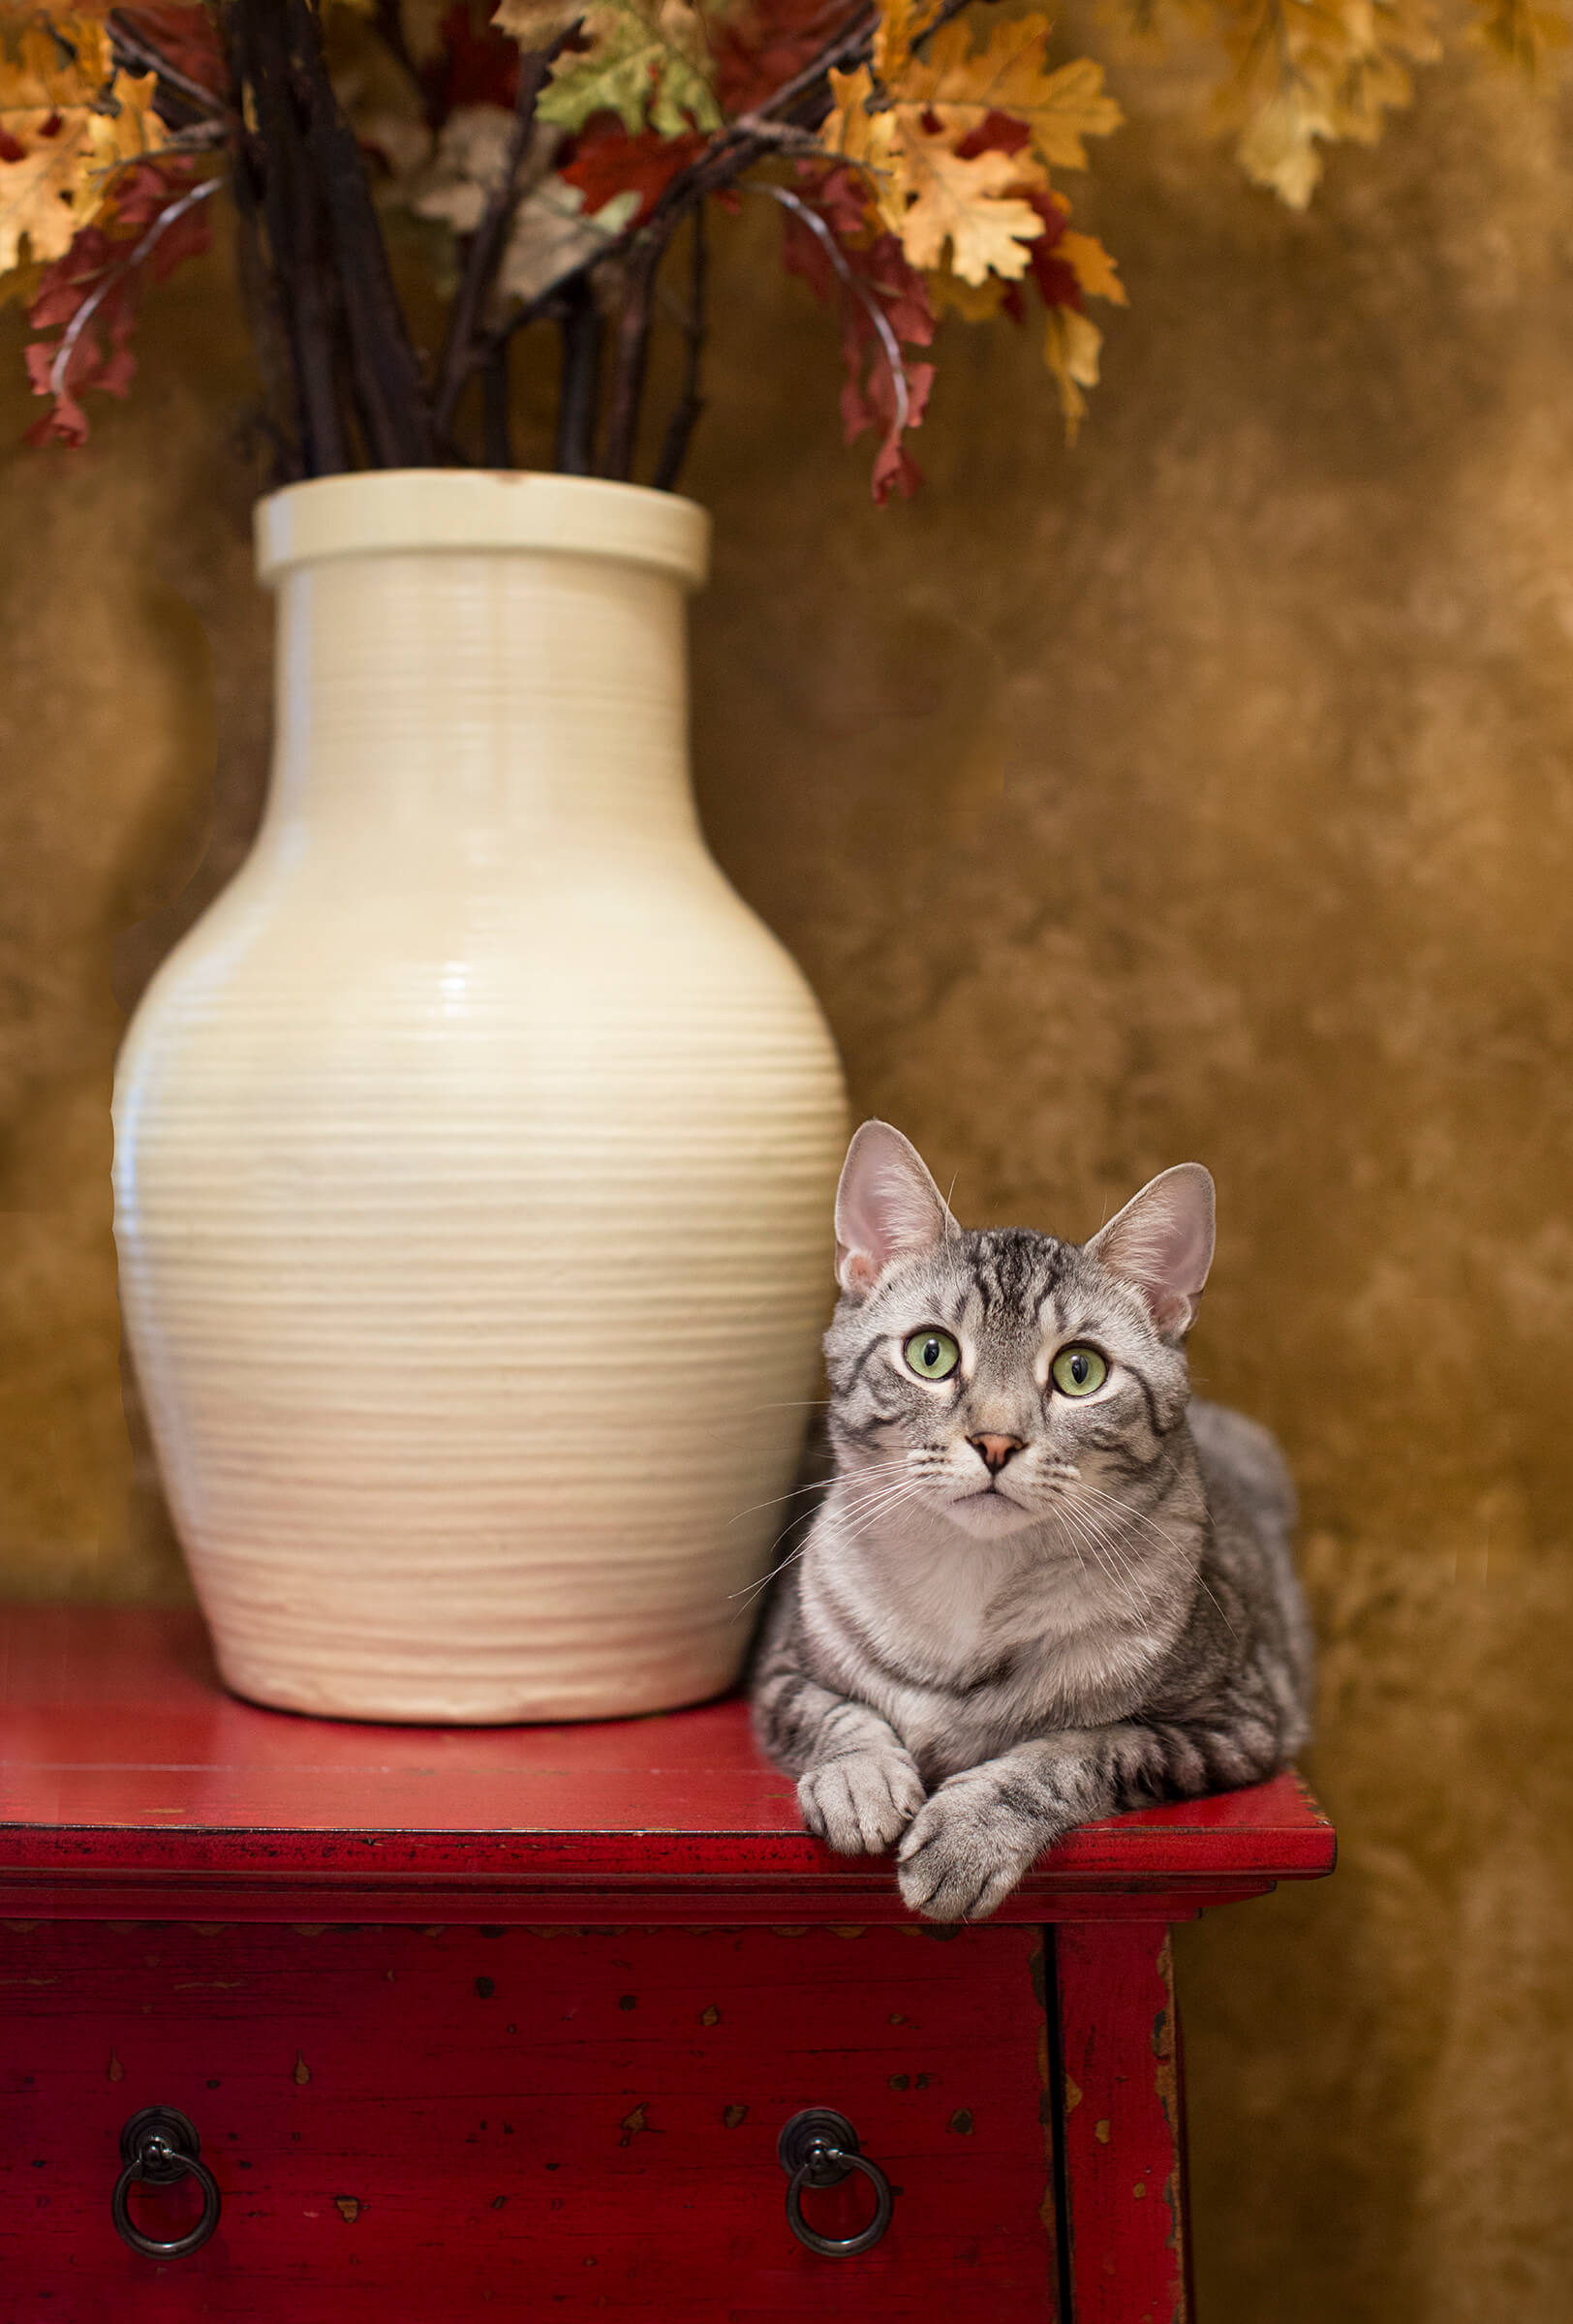 silver tabby cat sitting on table with vase